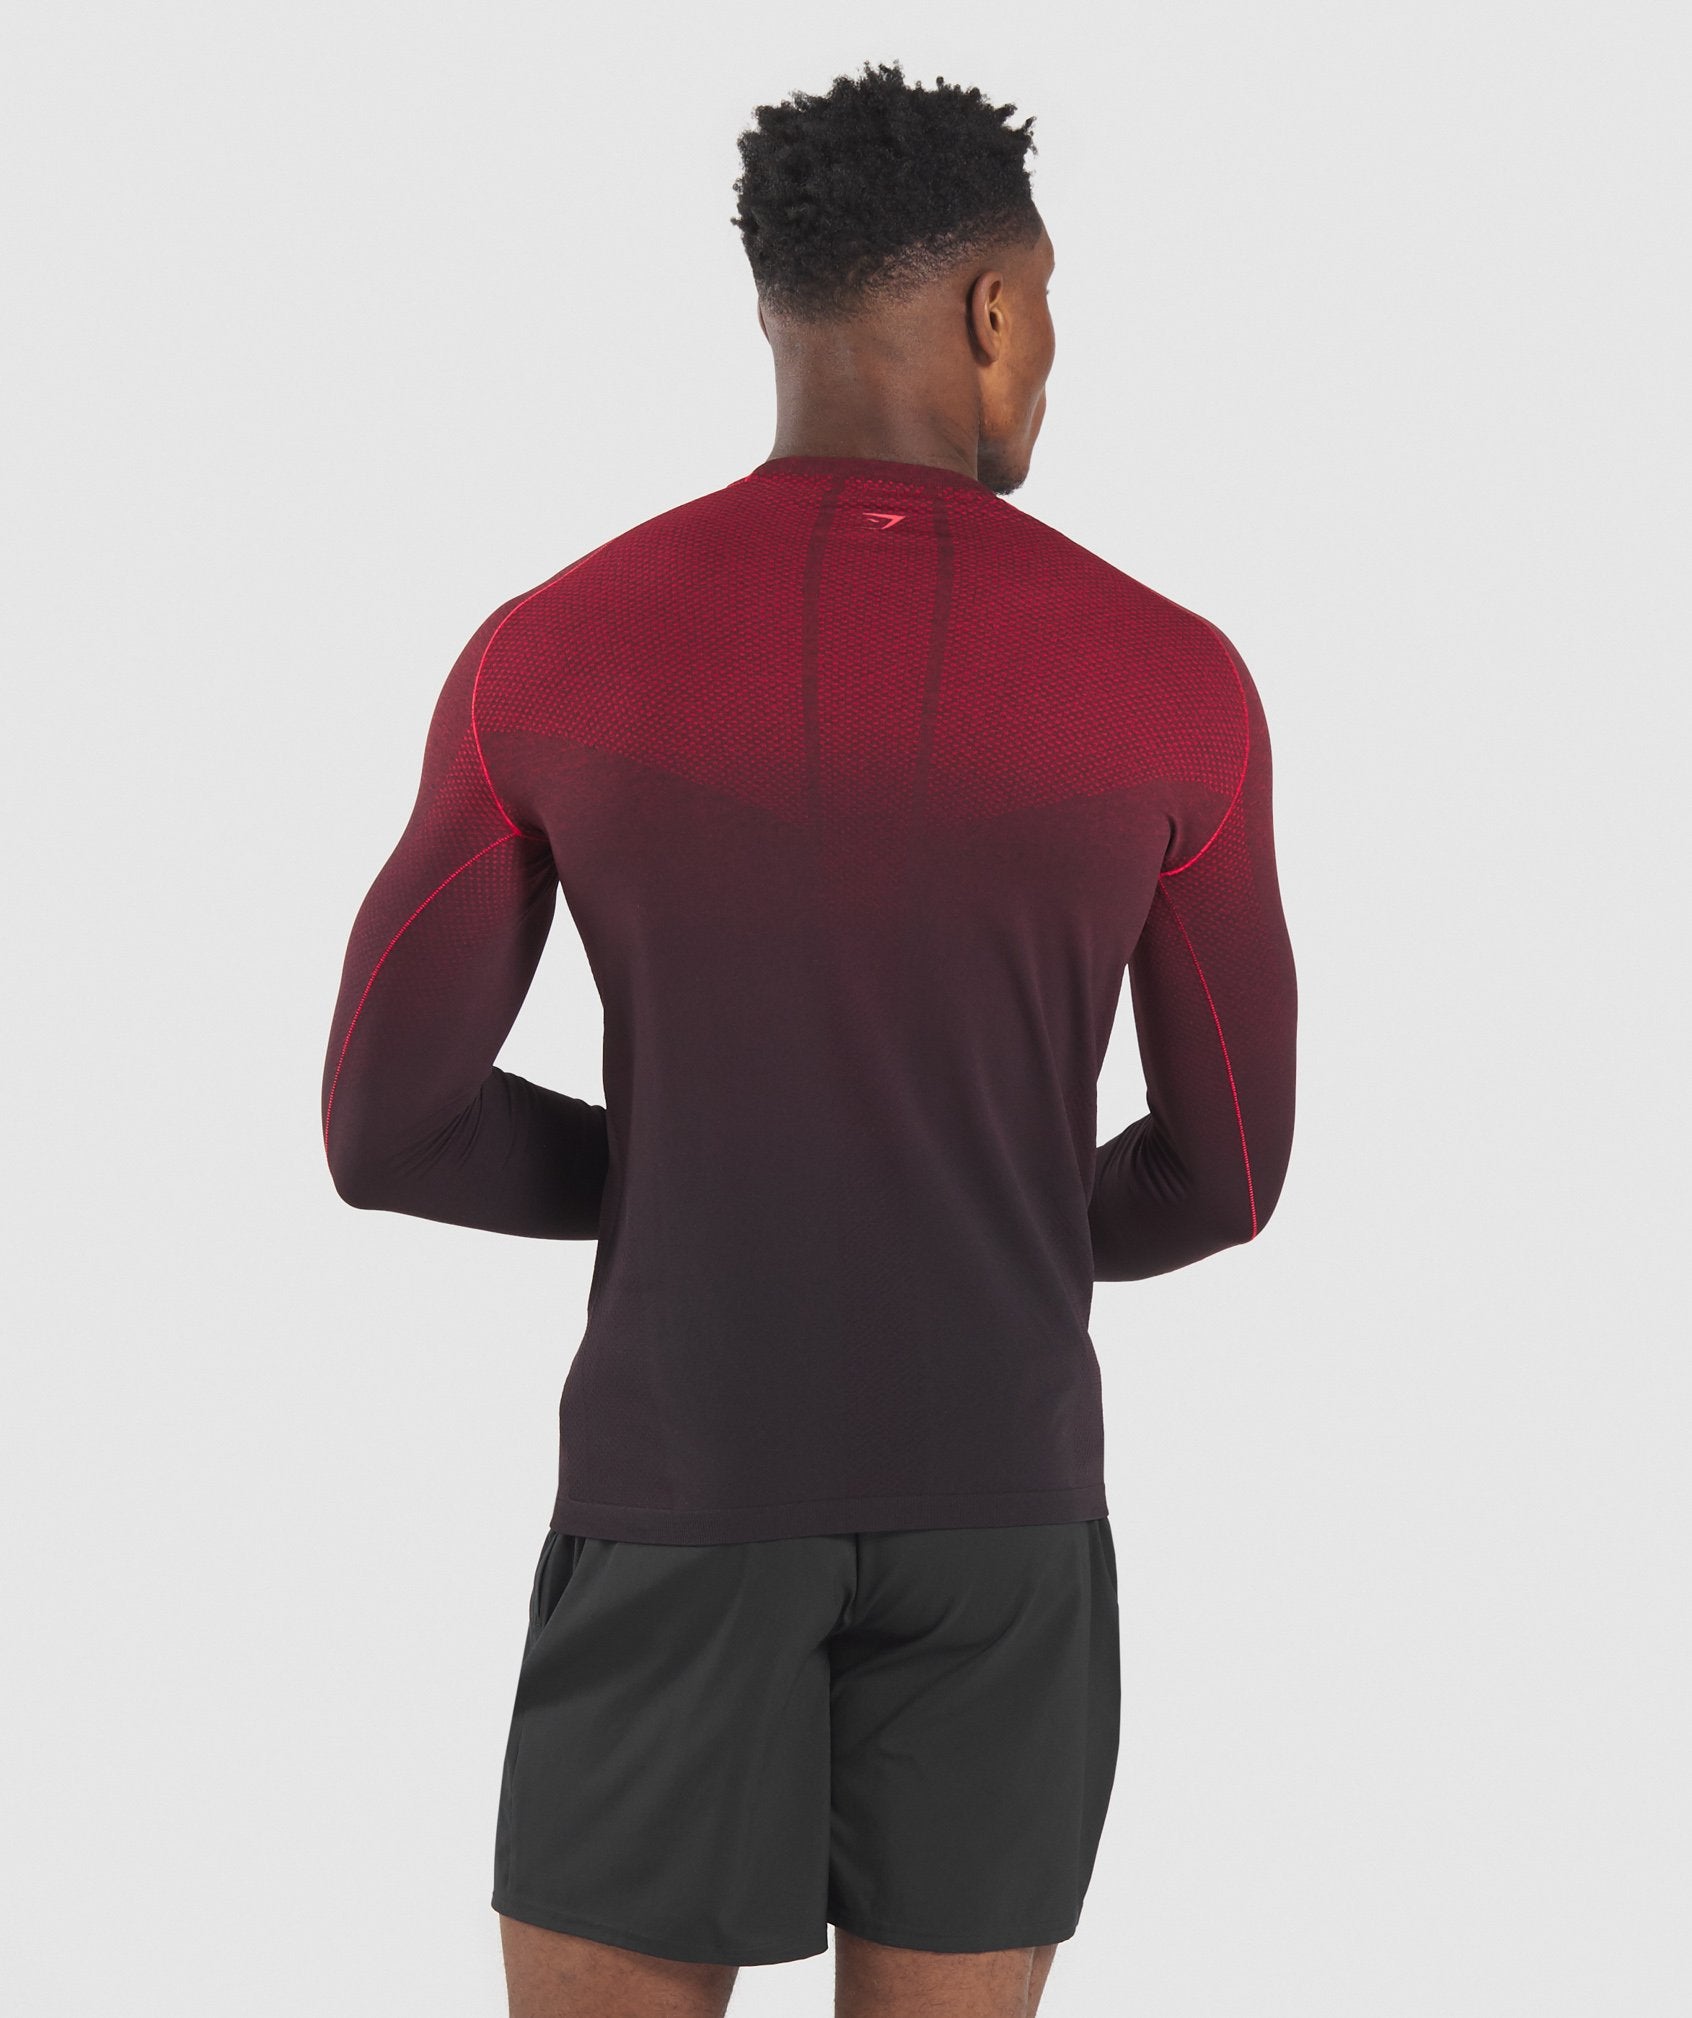 Vital Ombre Seamless Long Sleeve T-Shirt in Black/Red - view 3